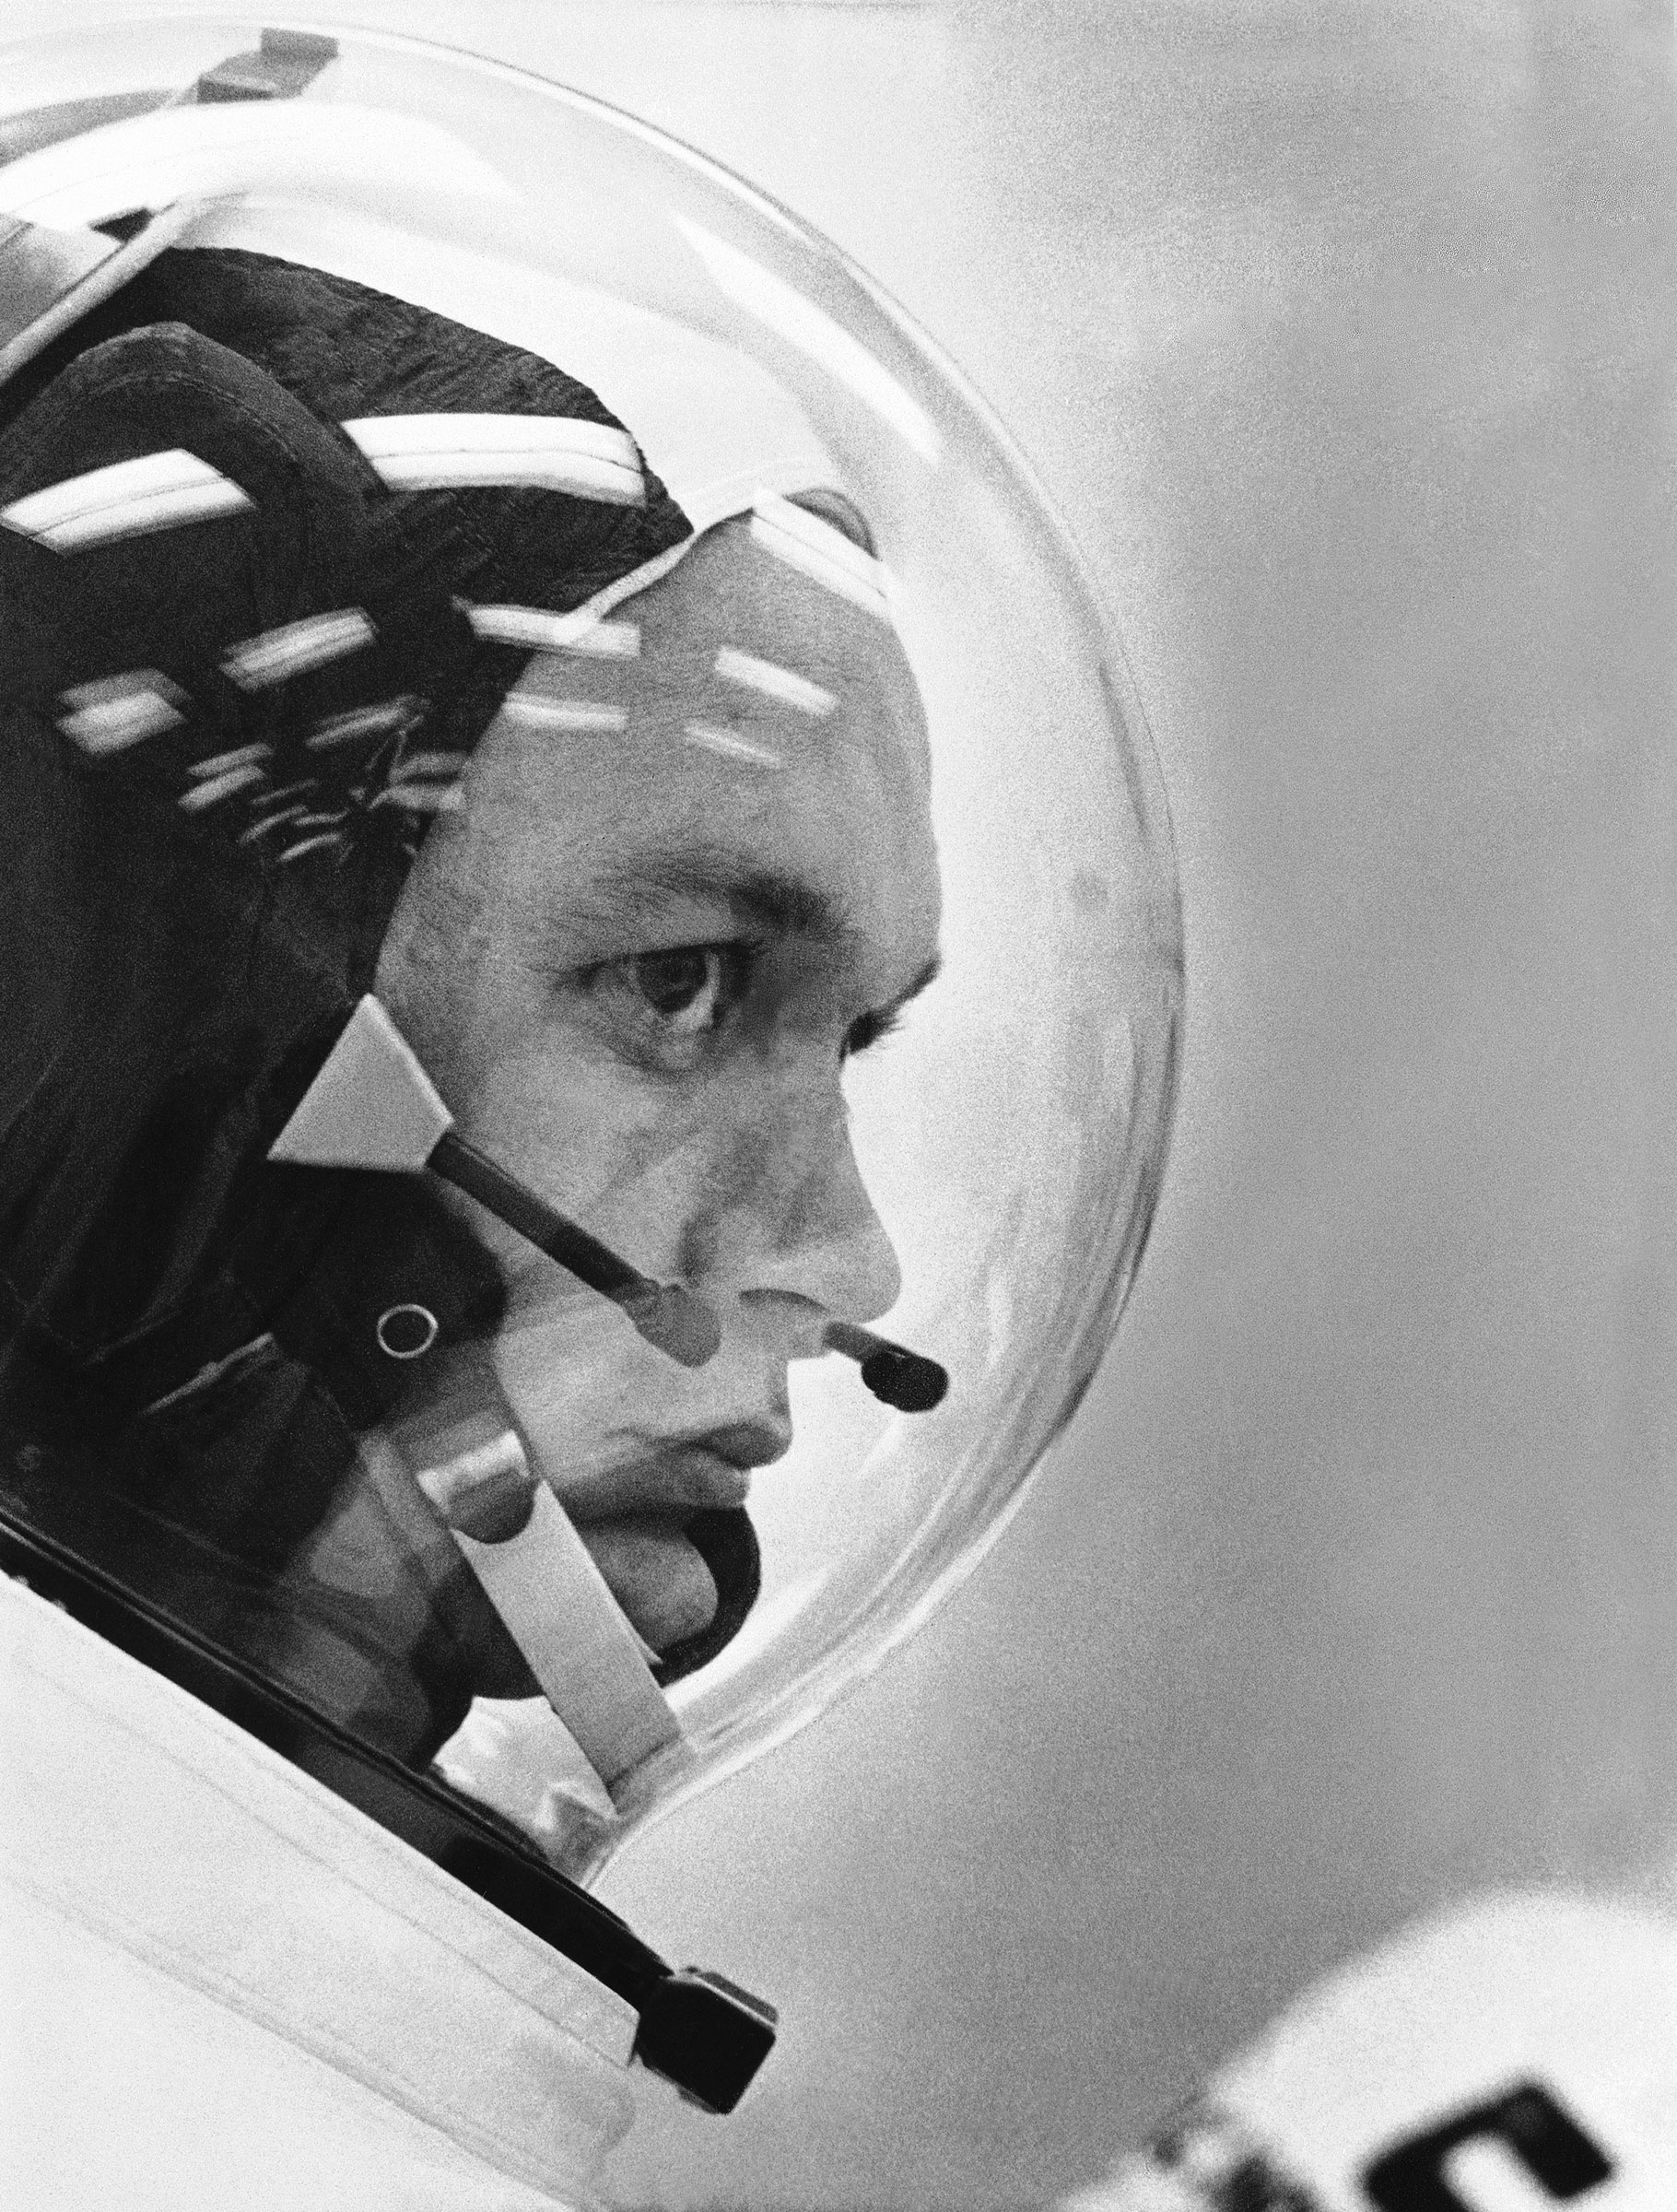 Astronaut Michael Collins wears his space helmet for the Apollo 11 moon mission, on July 20, 1969. (NASA/AP)